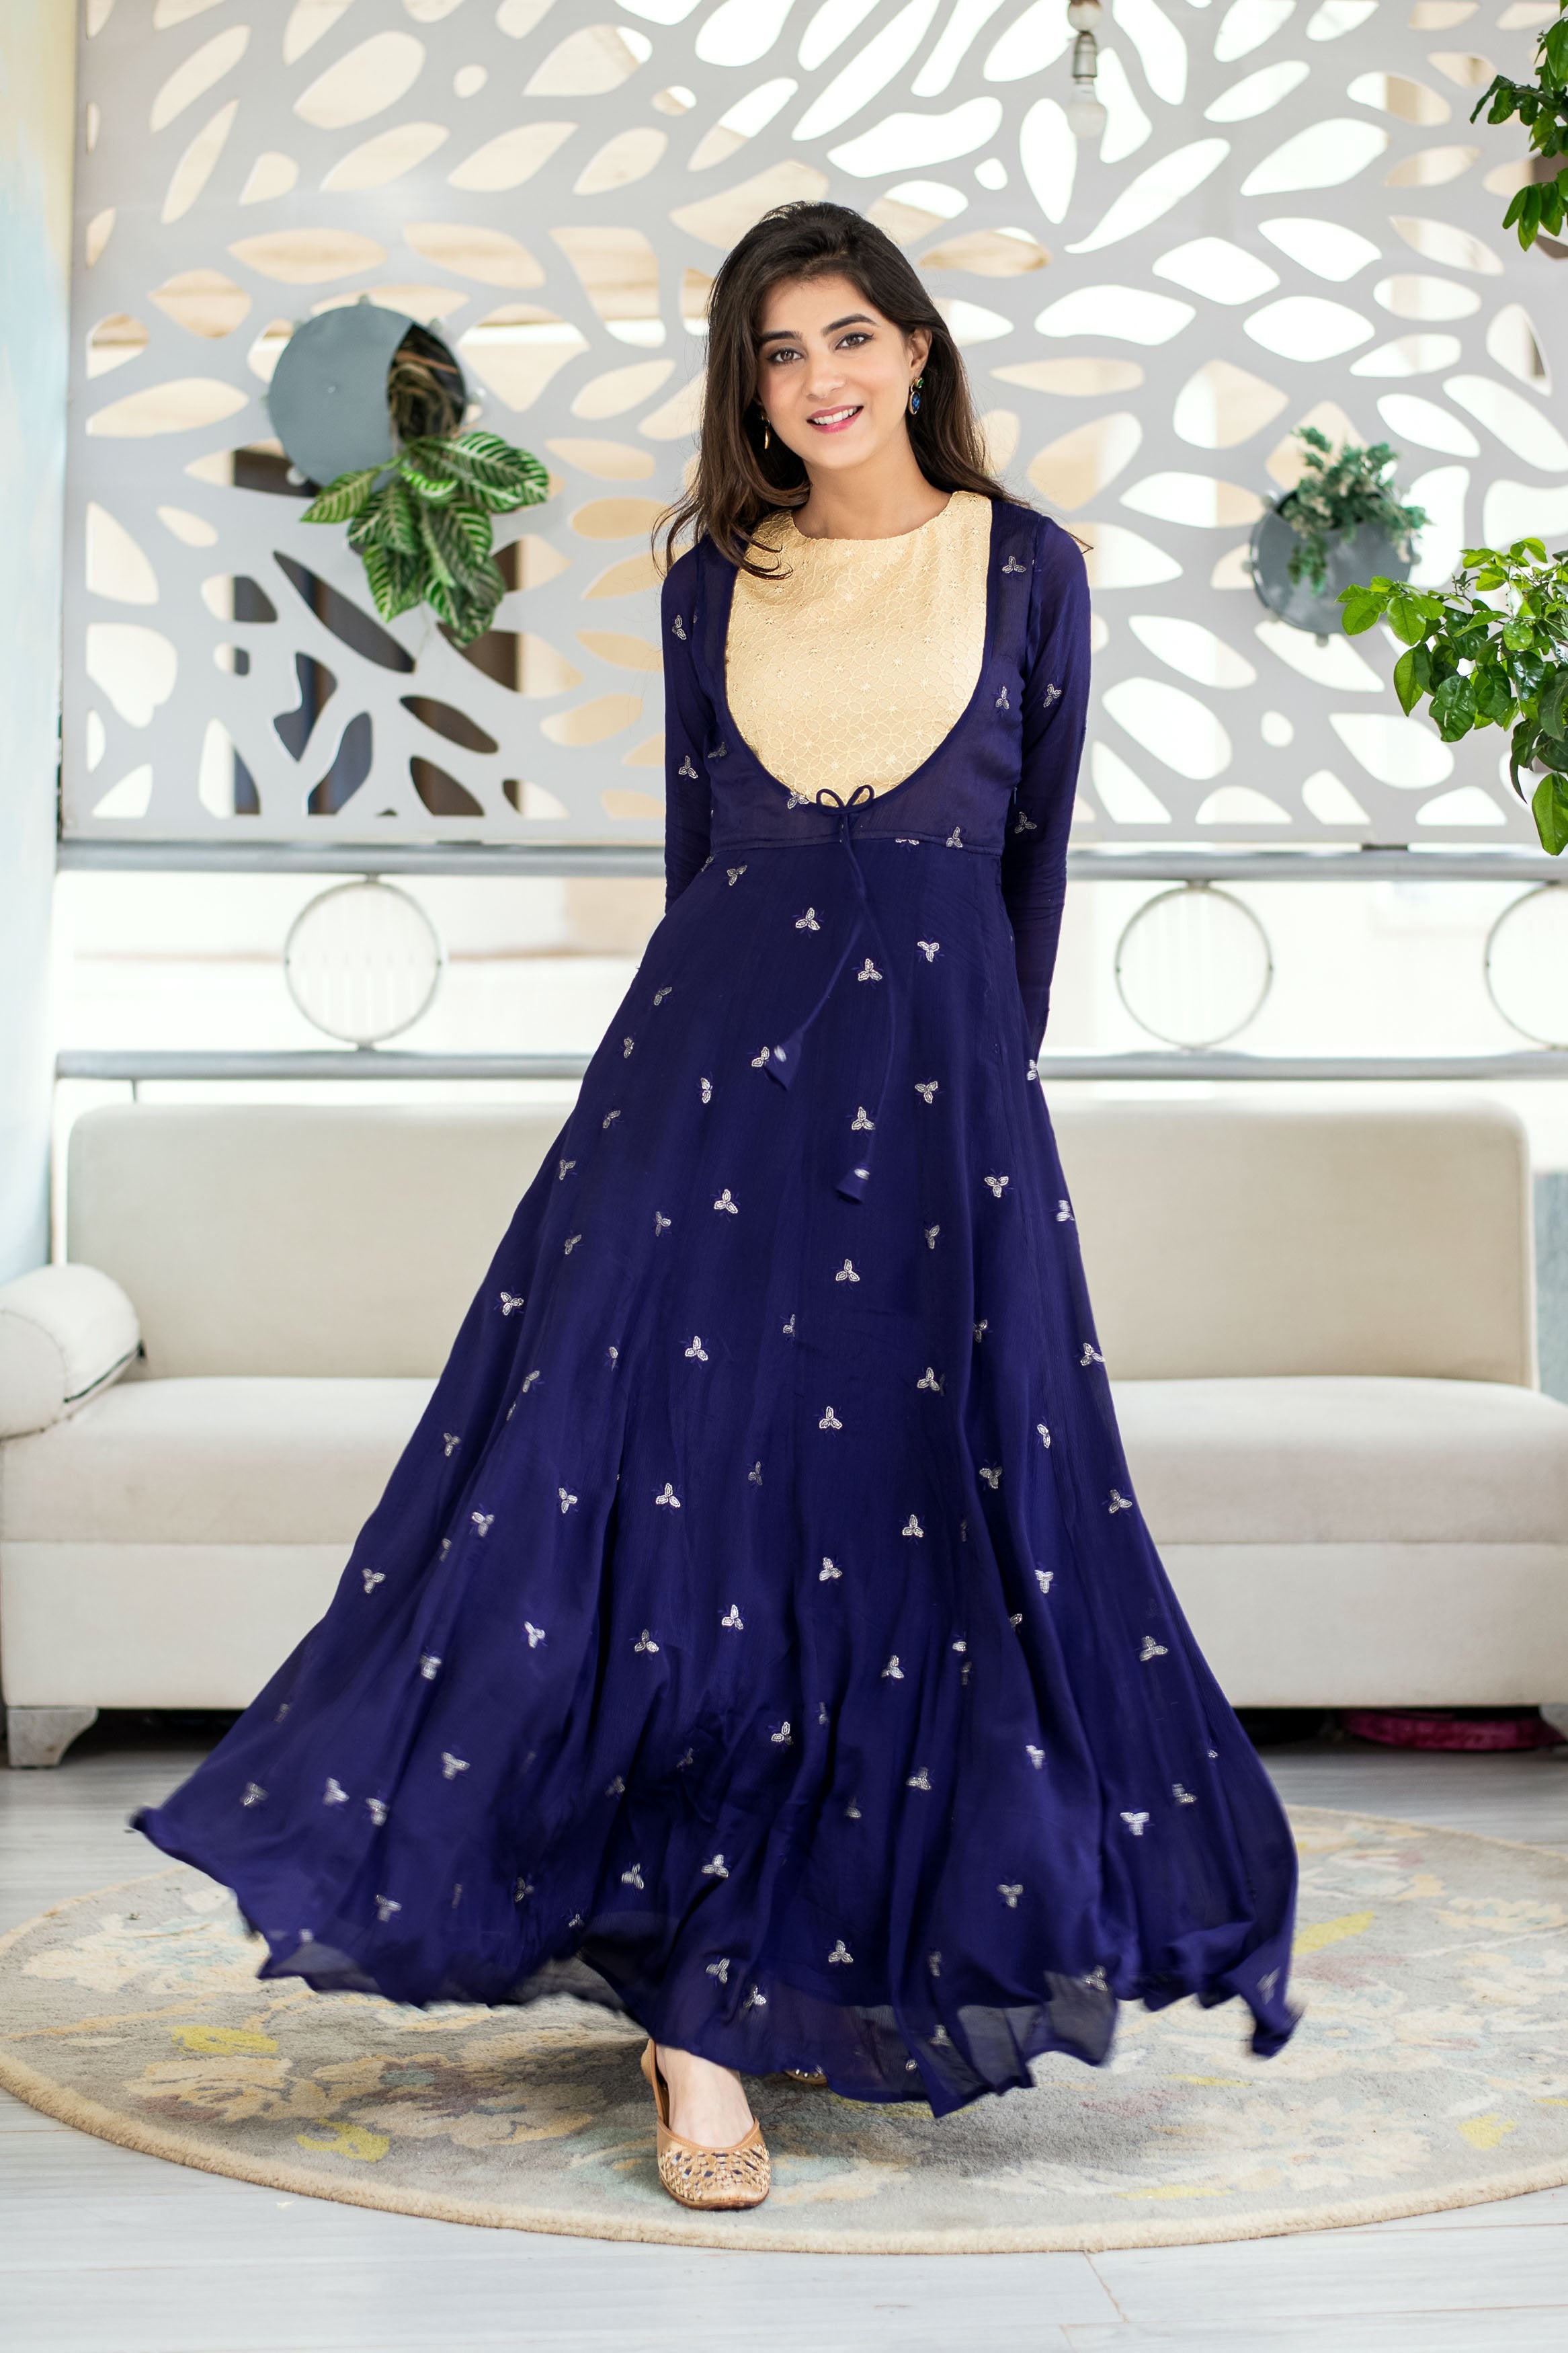 Women's Deep Blue and Beige Gown by Label Shaurya Sanadhya